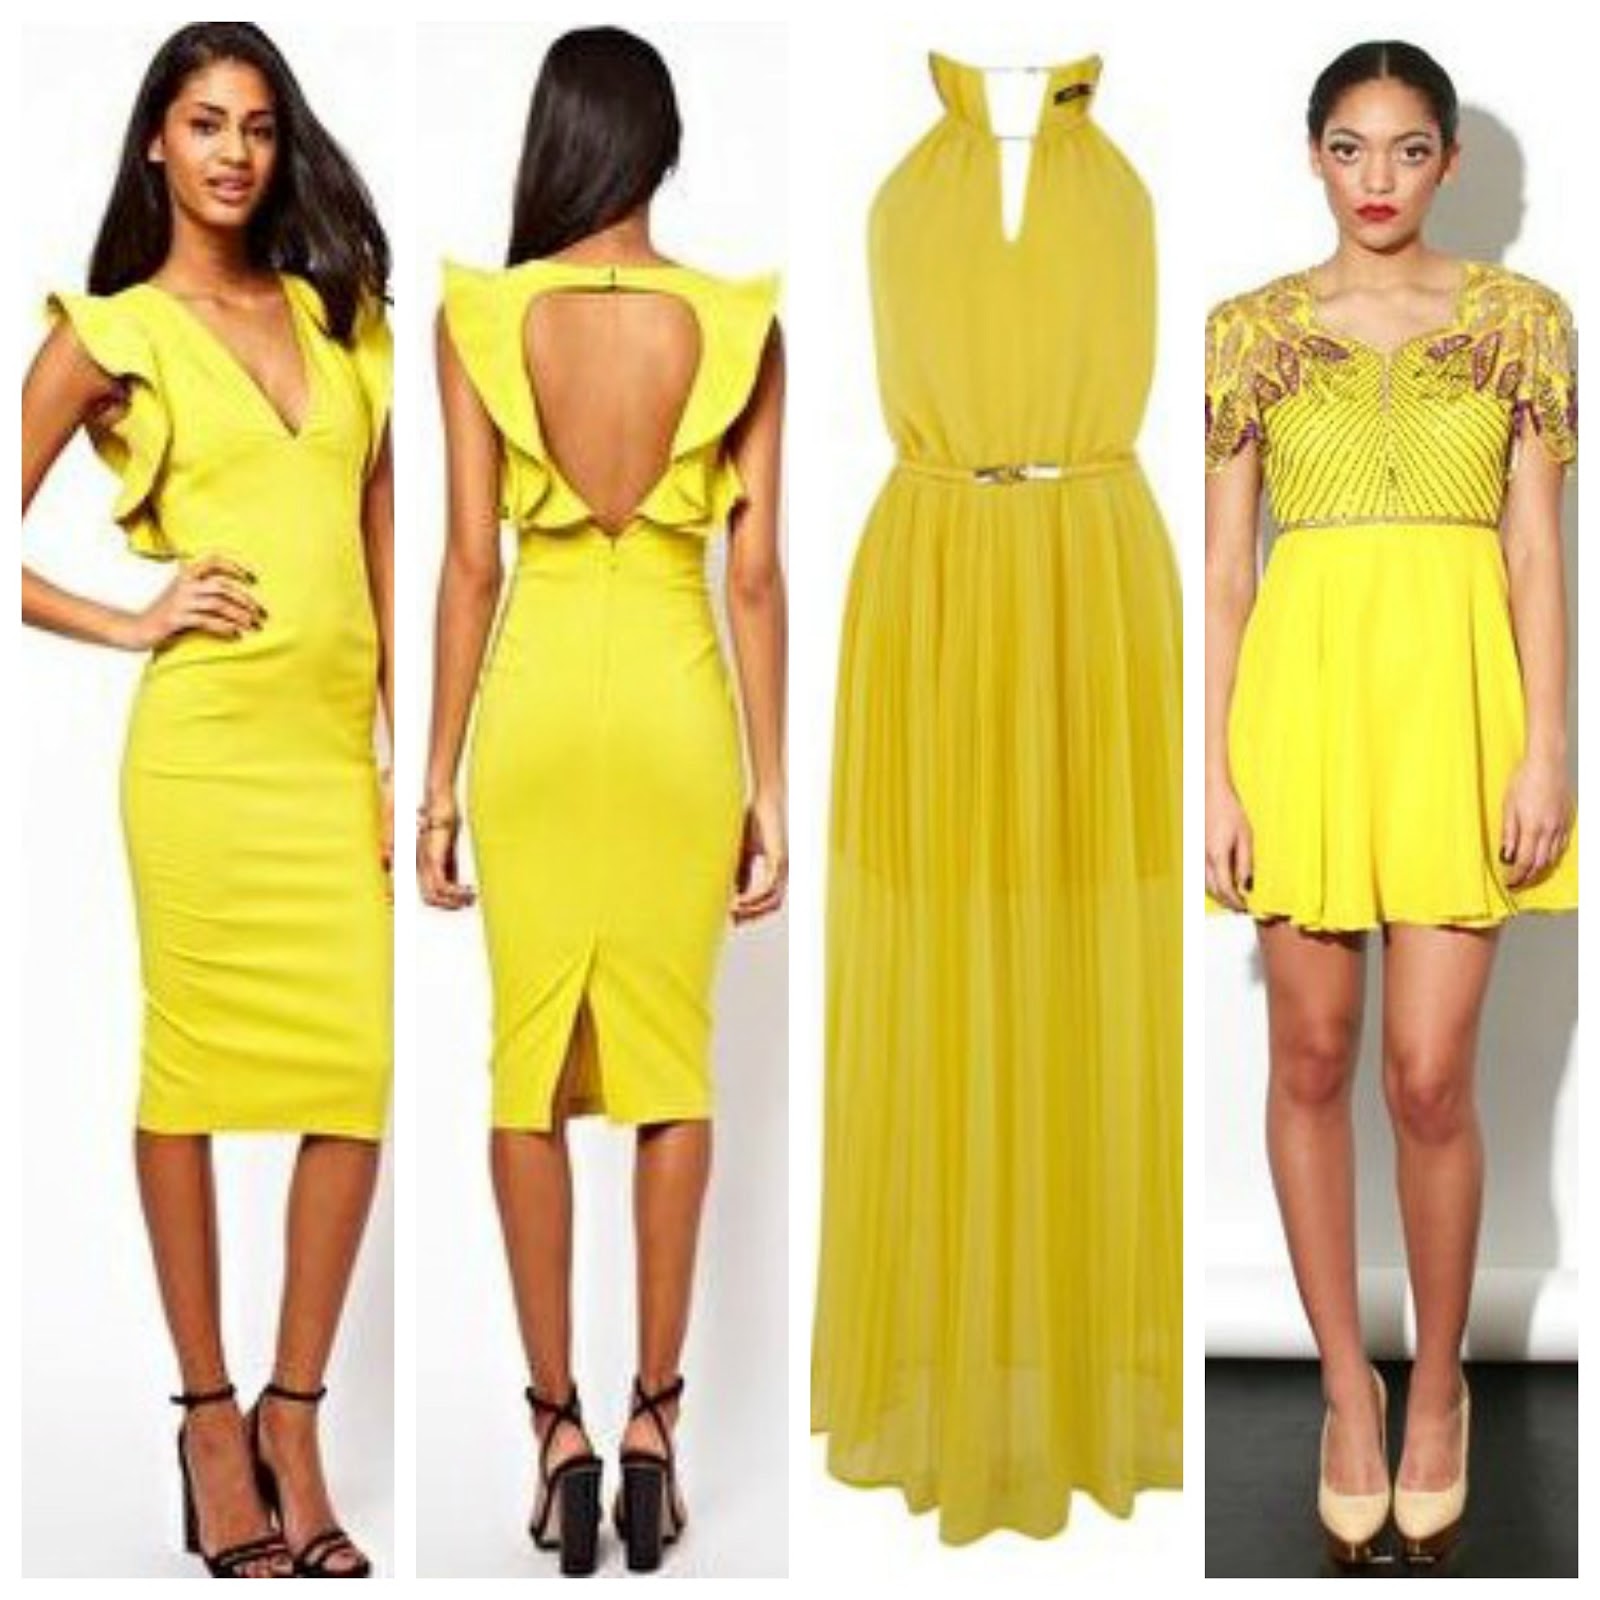 ... dresses. Of Summer Yellow Dresses Under 100 dresses to provide top